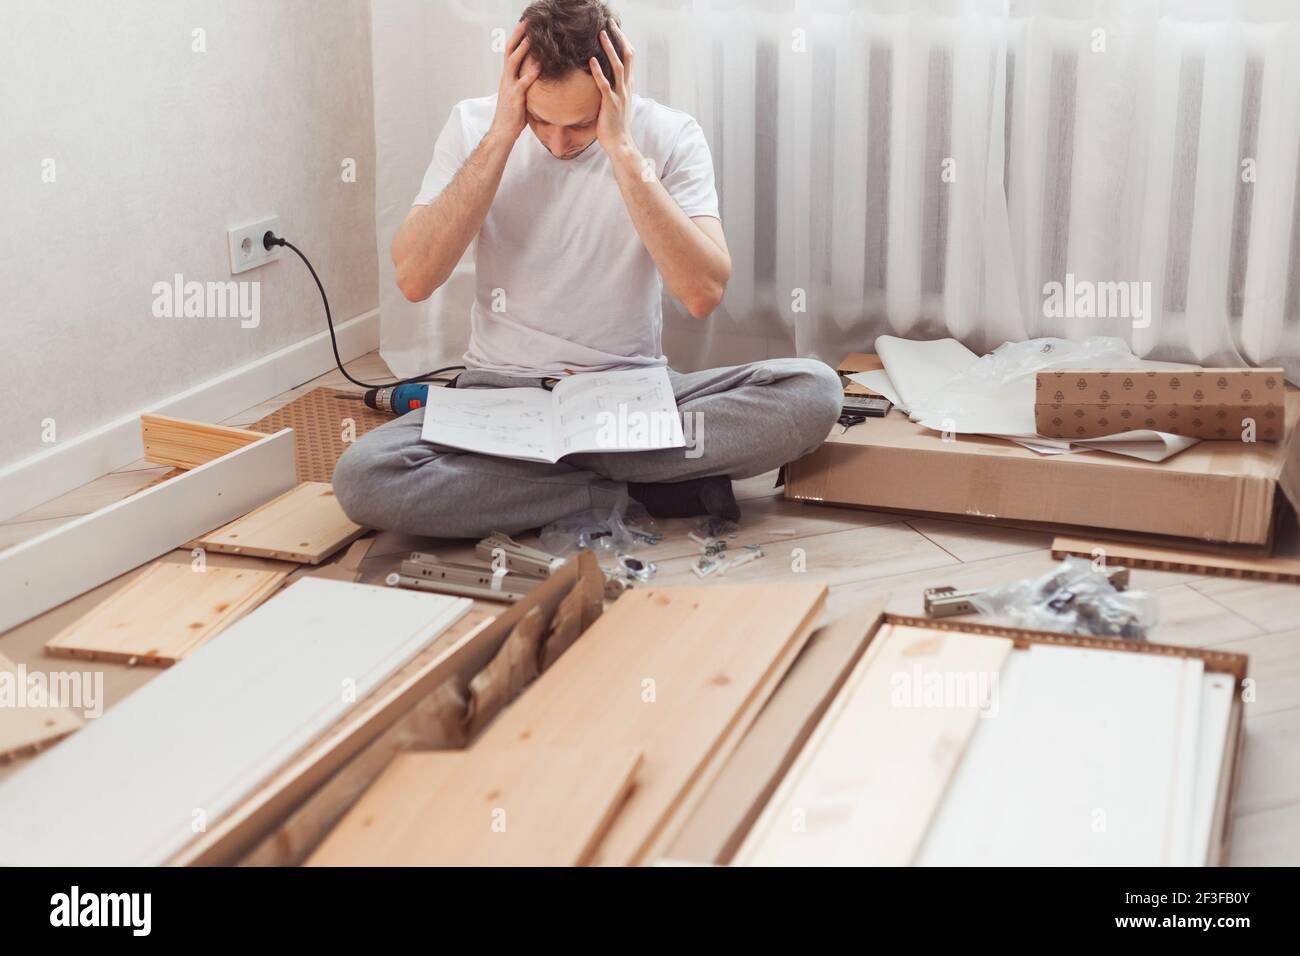 Bewildered man assembling new wooden furniture at home. Man reading instructions and misunderstand what to do the next. Stock Photo